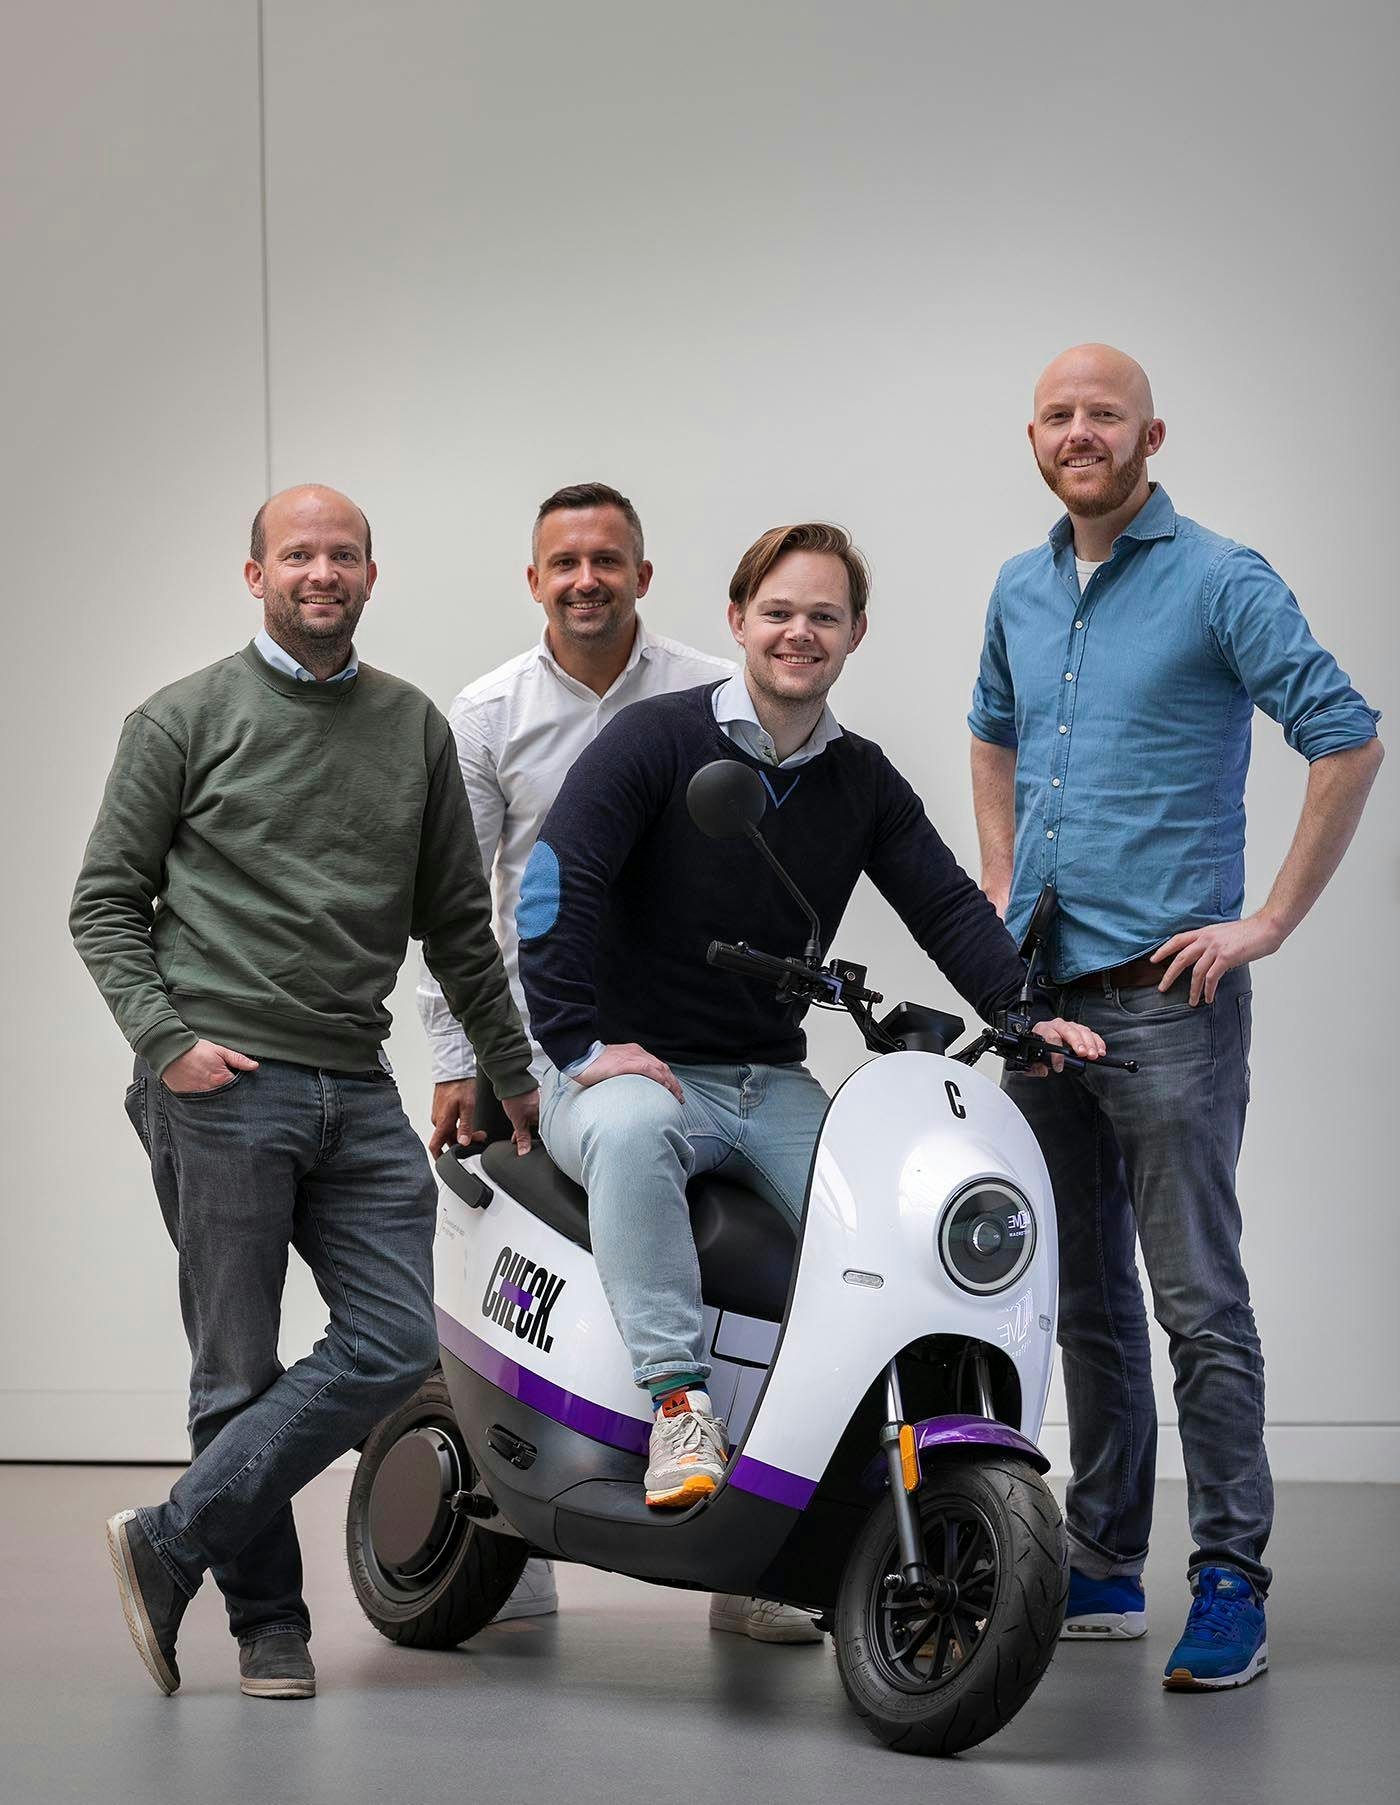 Shared e-moped platform Check accelerates growth after capital injection of 10 million euros